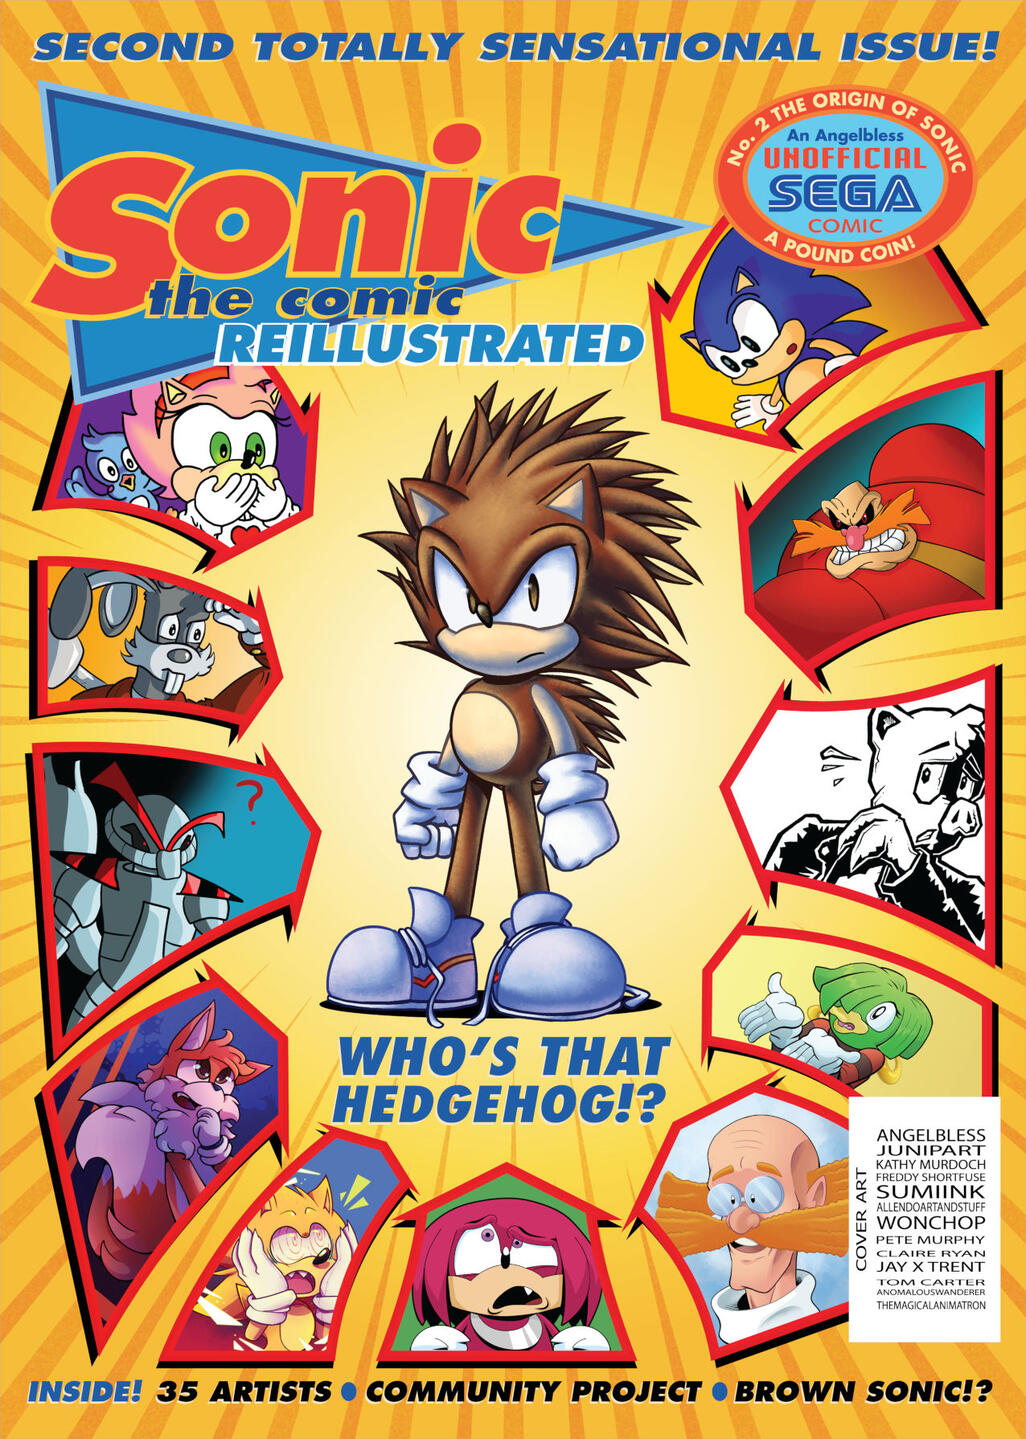 Sonic the Comic: Reillustrated Issue 2